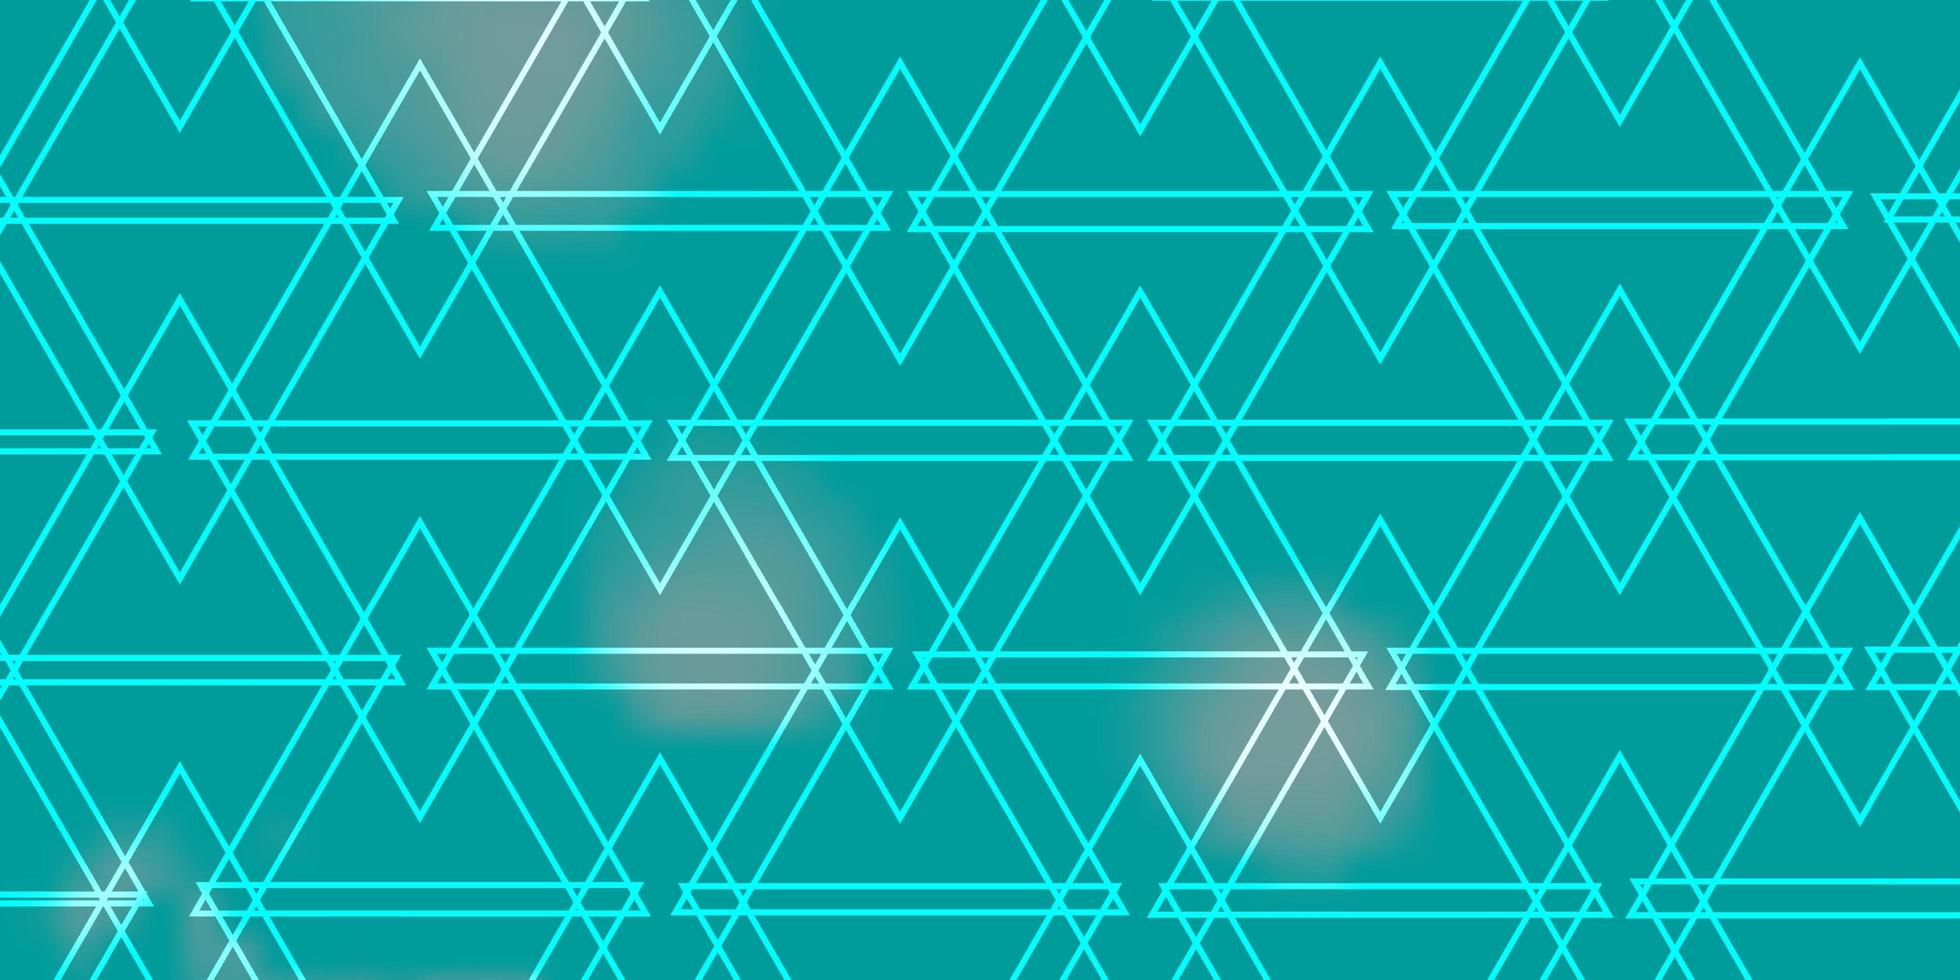 Light Blue Green vector background with lines triangles Modern gradient illustration with colorful triangles Template for landing pages